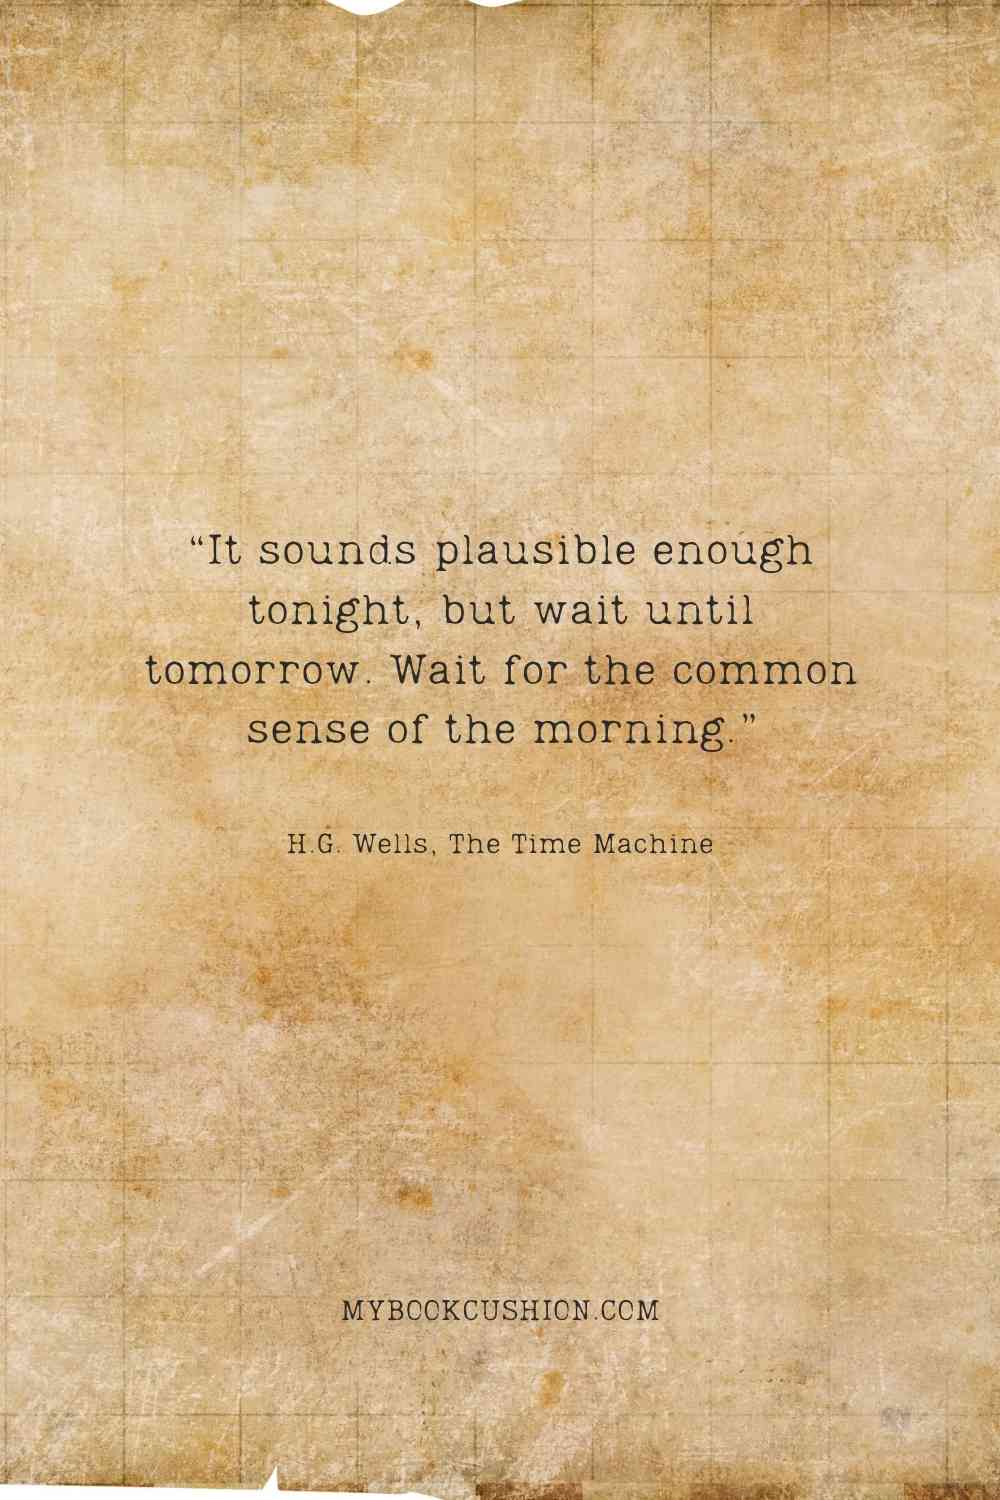 “It sounds plausible enough tonight, but wait until tomorrow. Wait for the common sense of the morning.” -H.G. Wells, The Time Machine